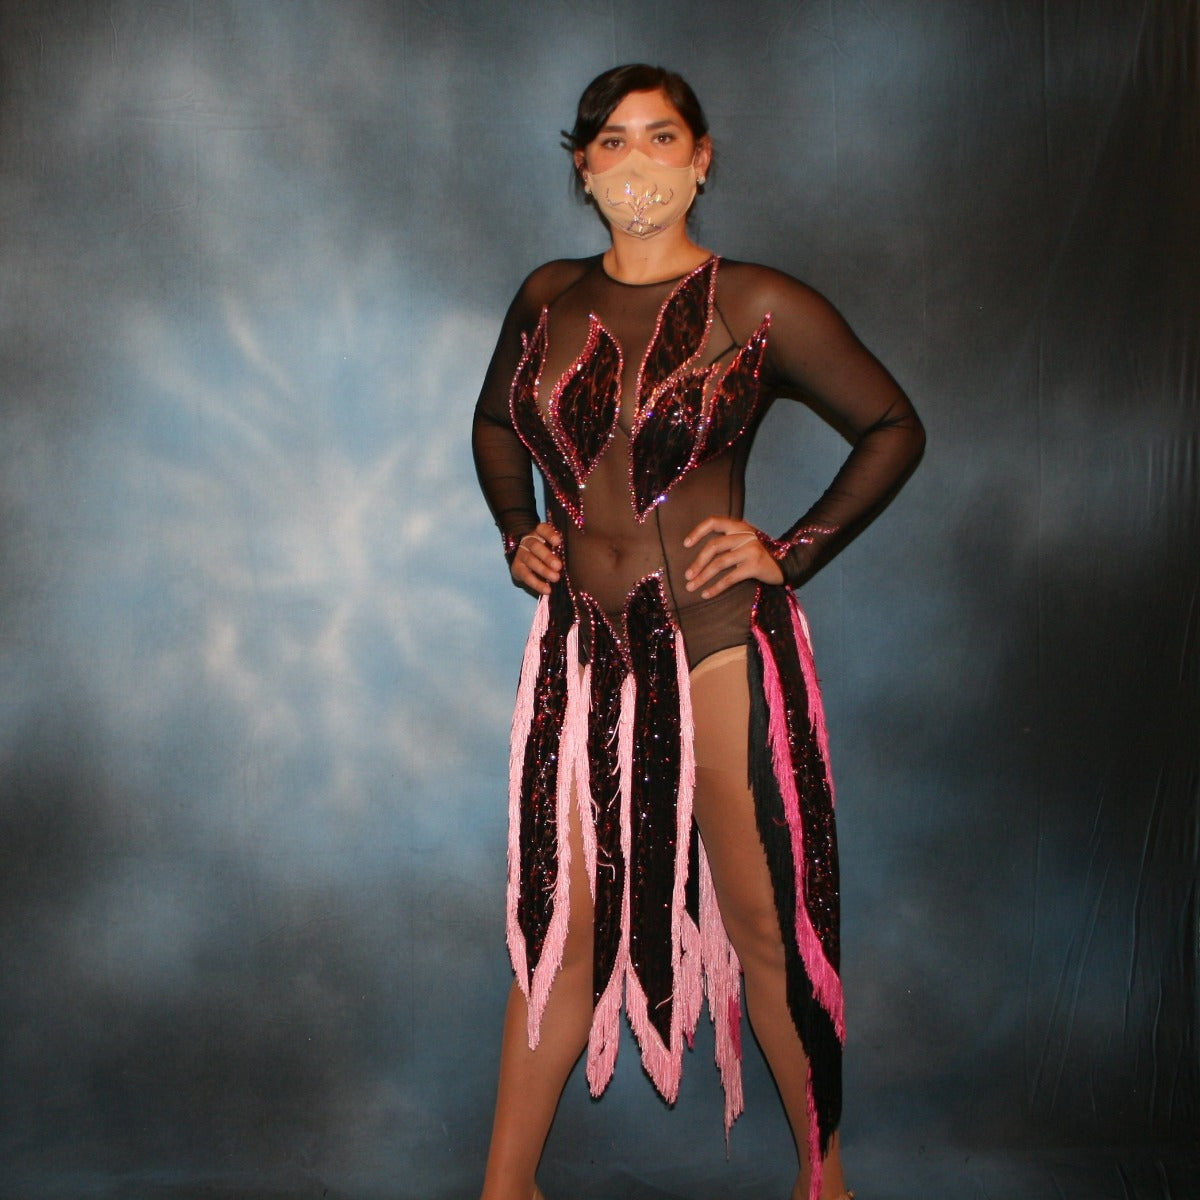 Crystal's Creations Black Latin/rhythm dress features hand cut flame type motifs of glitter slinky with red & pink delicate oriental print on black mesh base with several flame type panels with yards of pink chainette fringe creating the skirting…embellished with rose & light rose Swarovski rhinestones, about 13 gross.